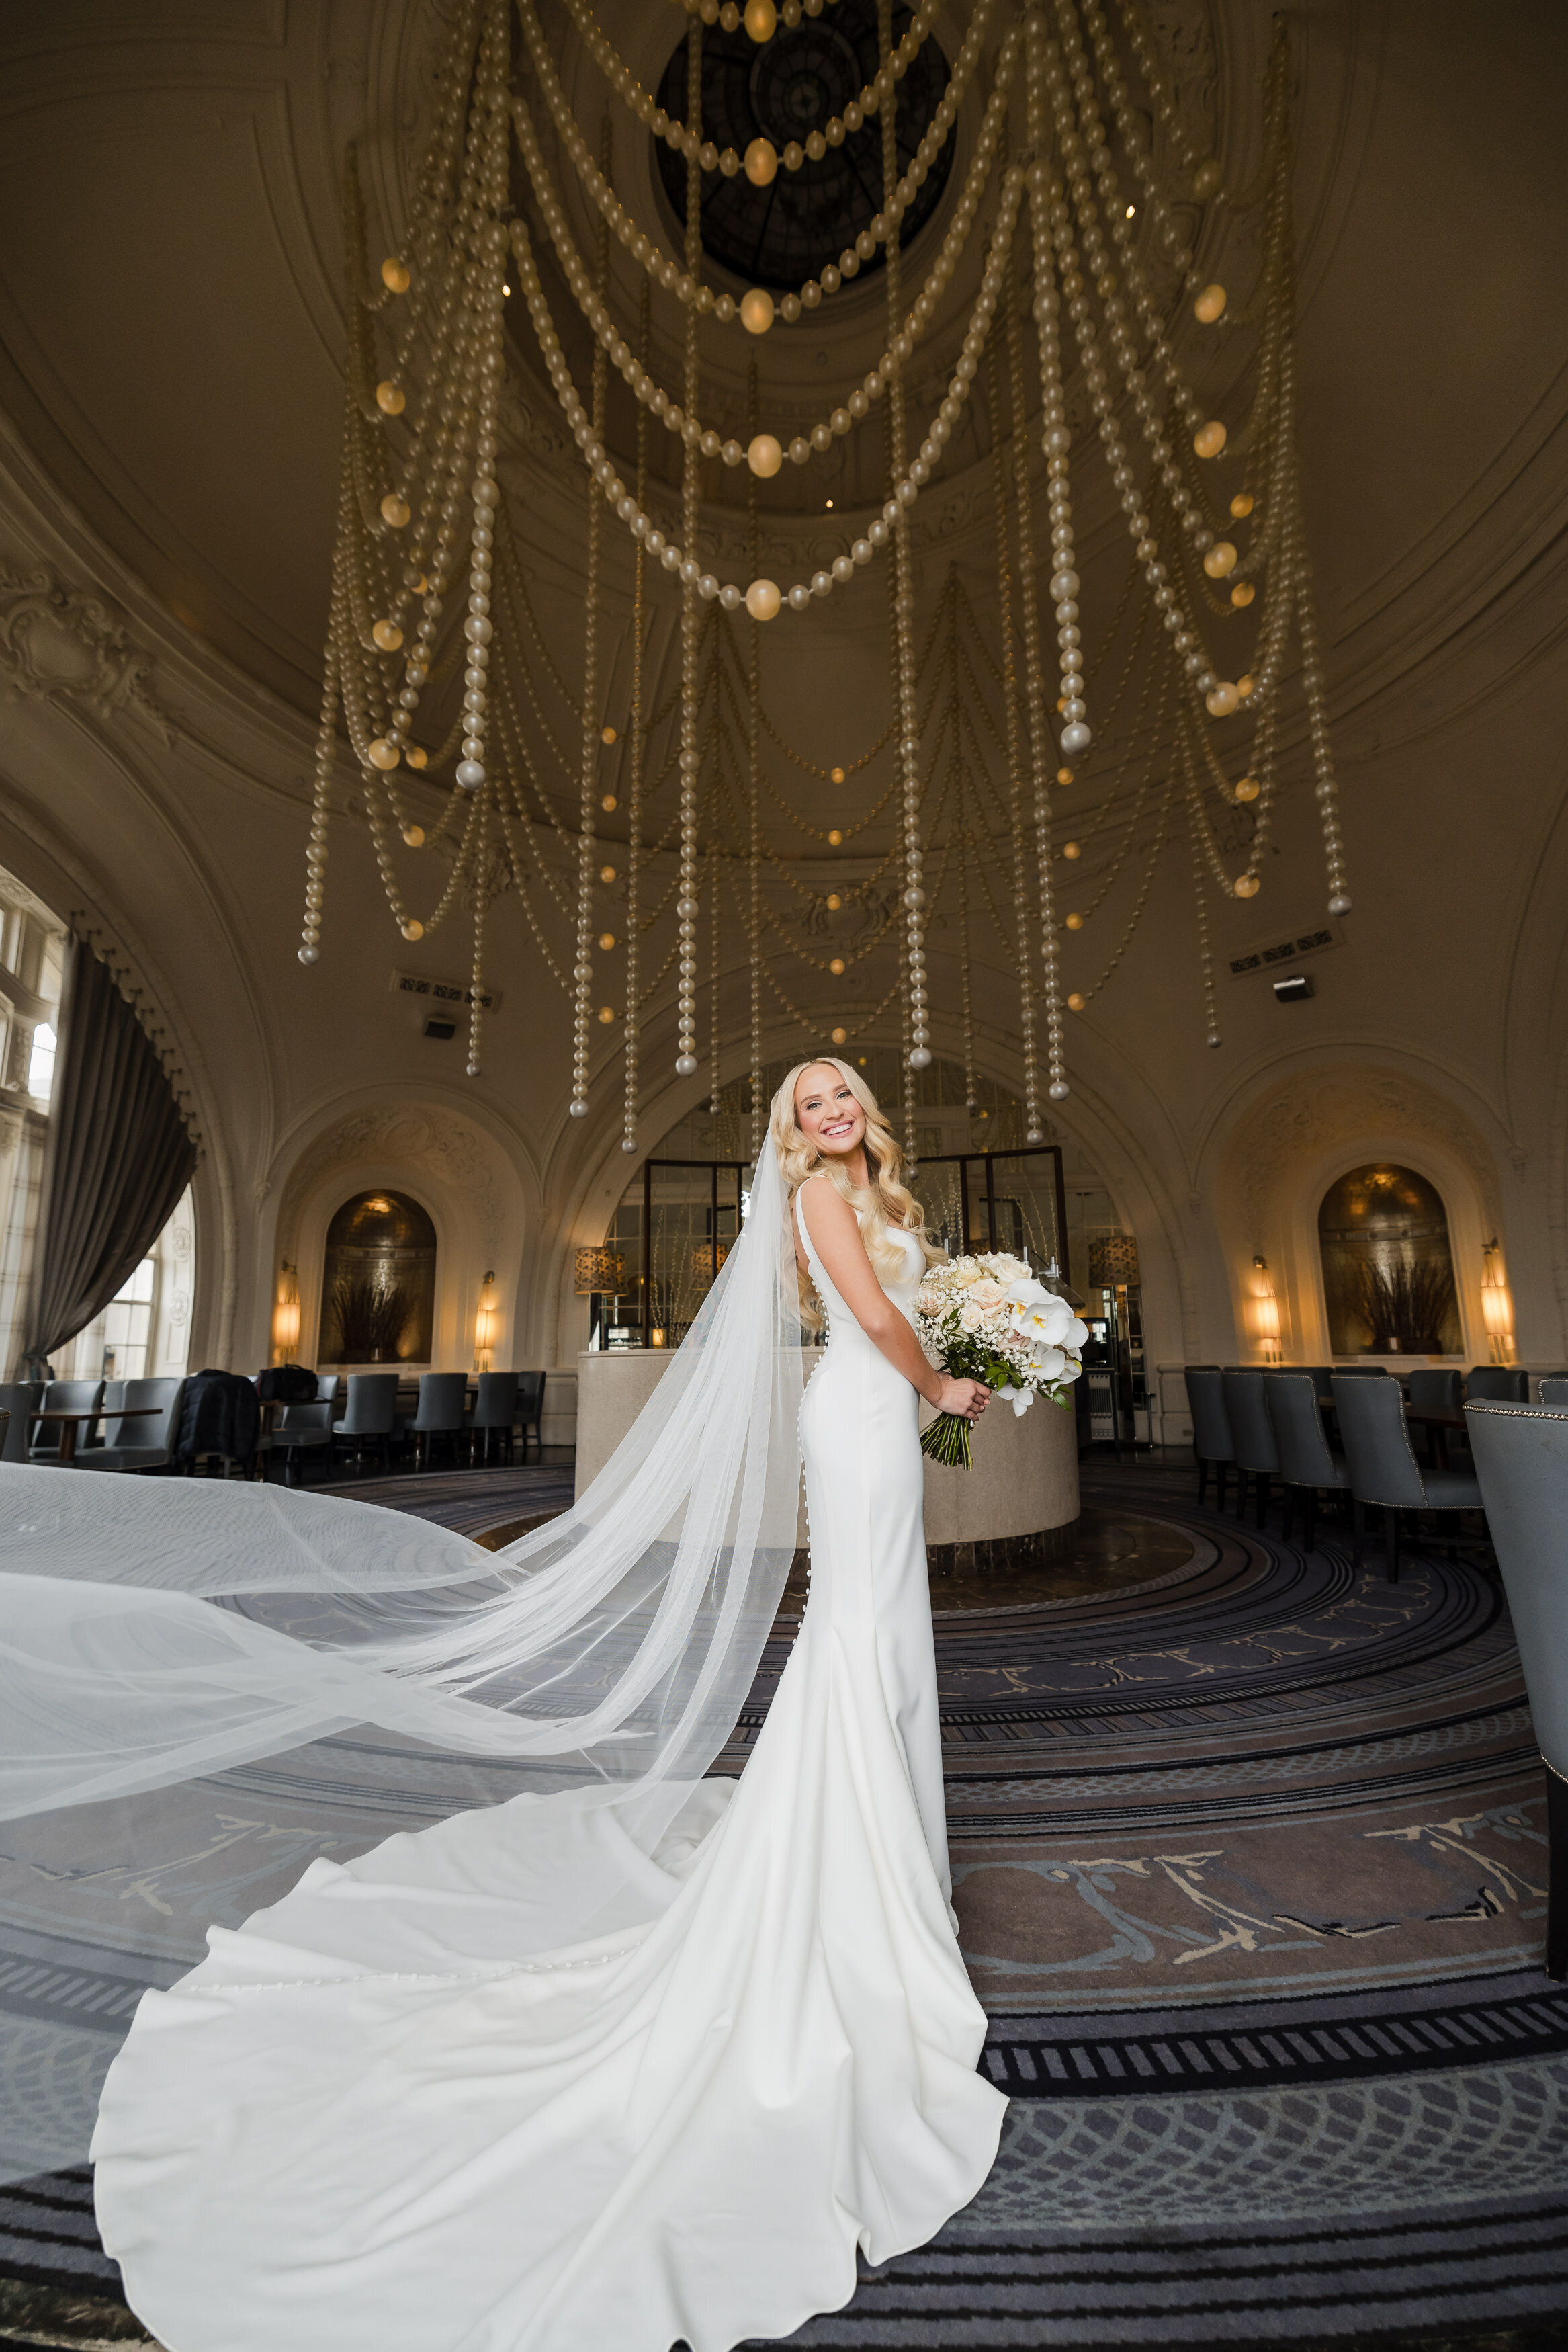 A wide angle bridal portrait of an elegant blond bride with a flowing veil under the pearl chandelier at the XIX at Bellevue on her wedding day in Philadelphia